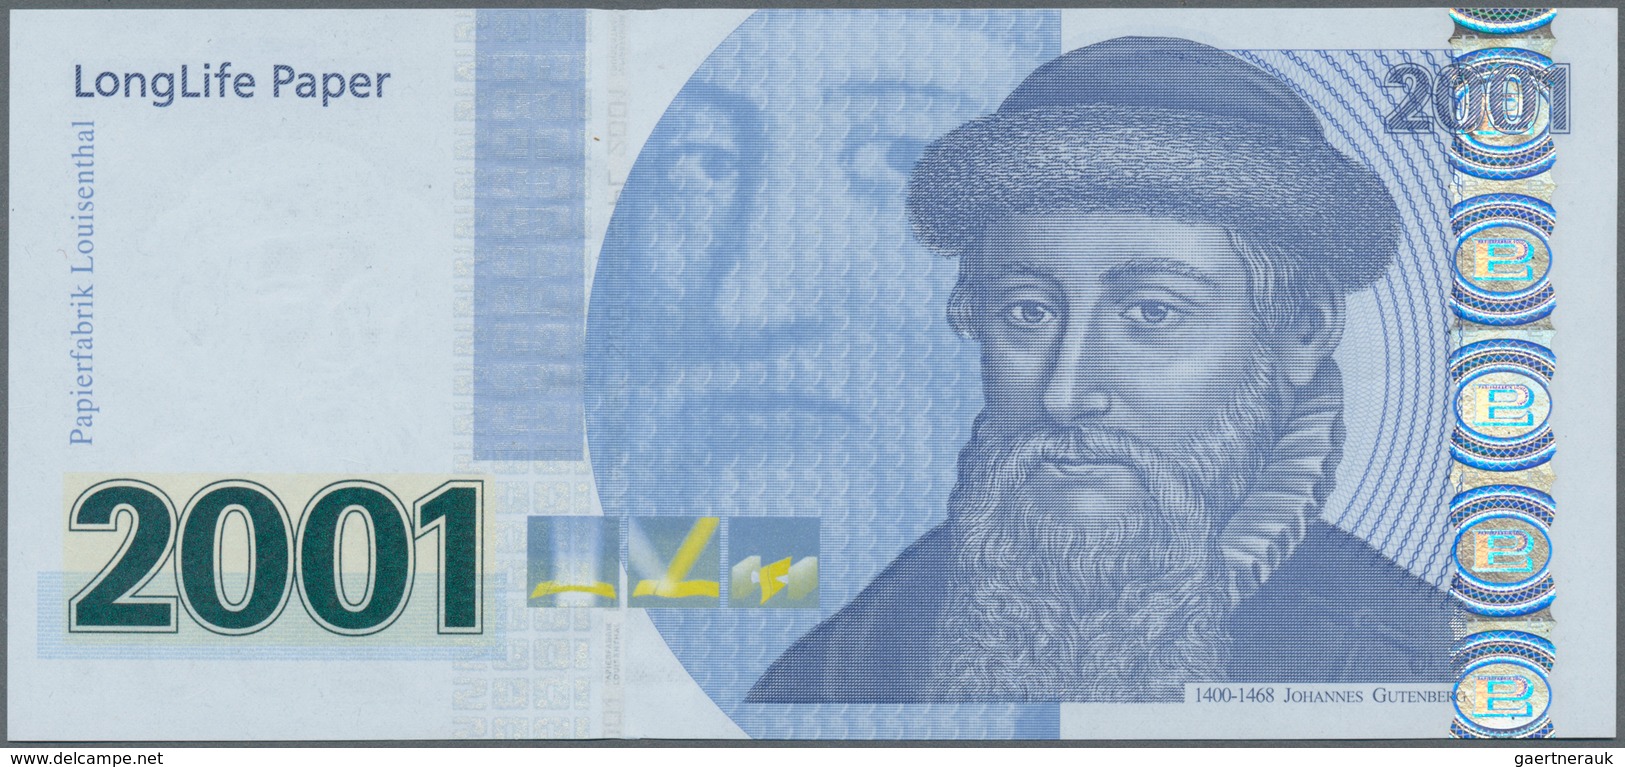 Testbanknoten: Test Note "STRONGLIFE" Produced In 2001 By The Louisenthal Paper Mill In Cooperation - Fiktive & Specimen